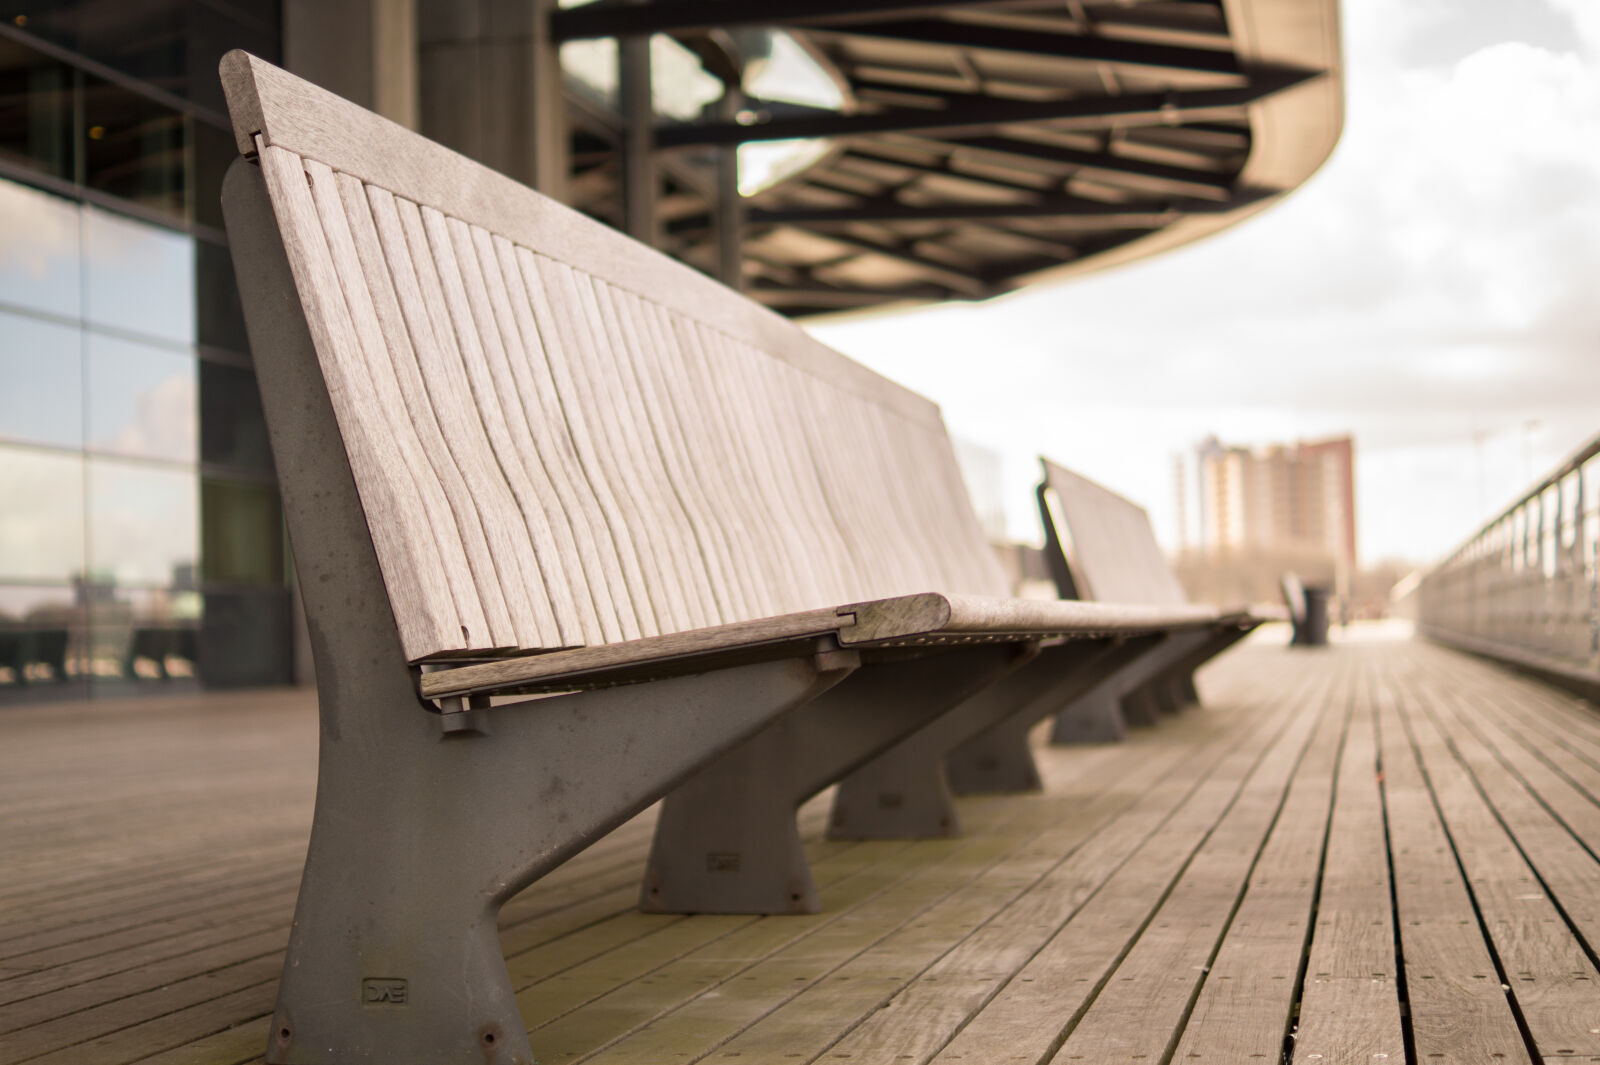 Sony DT 35mm F1.8 SAM sample photo. Bench, city, view, resting photography